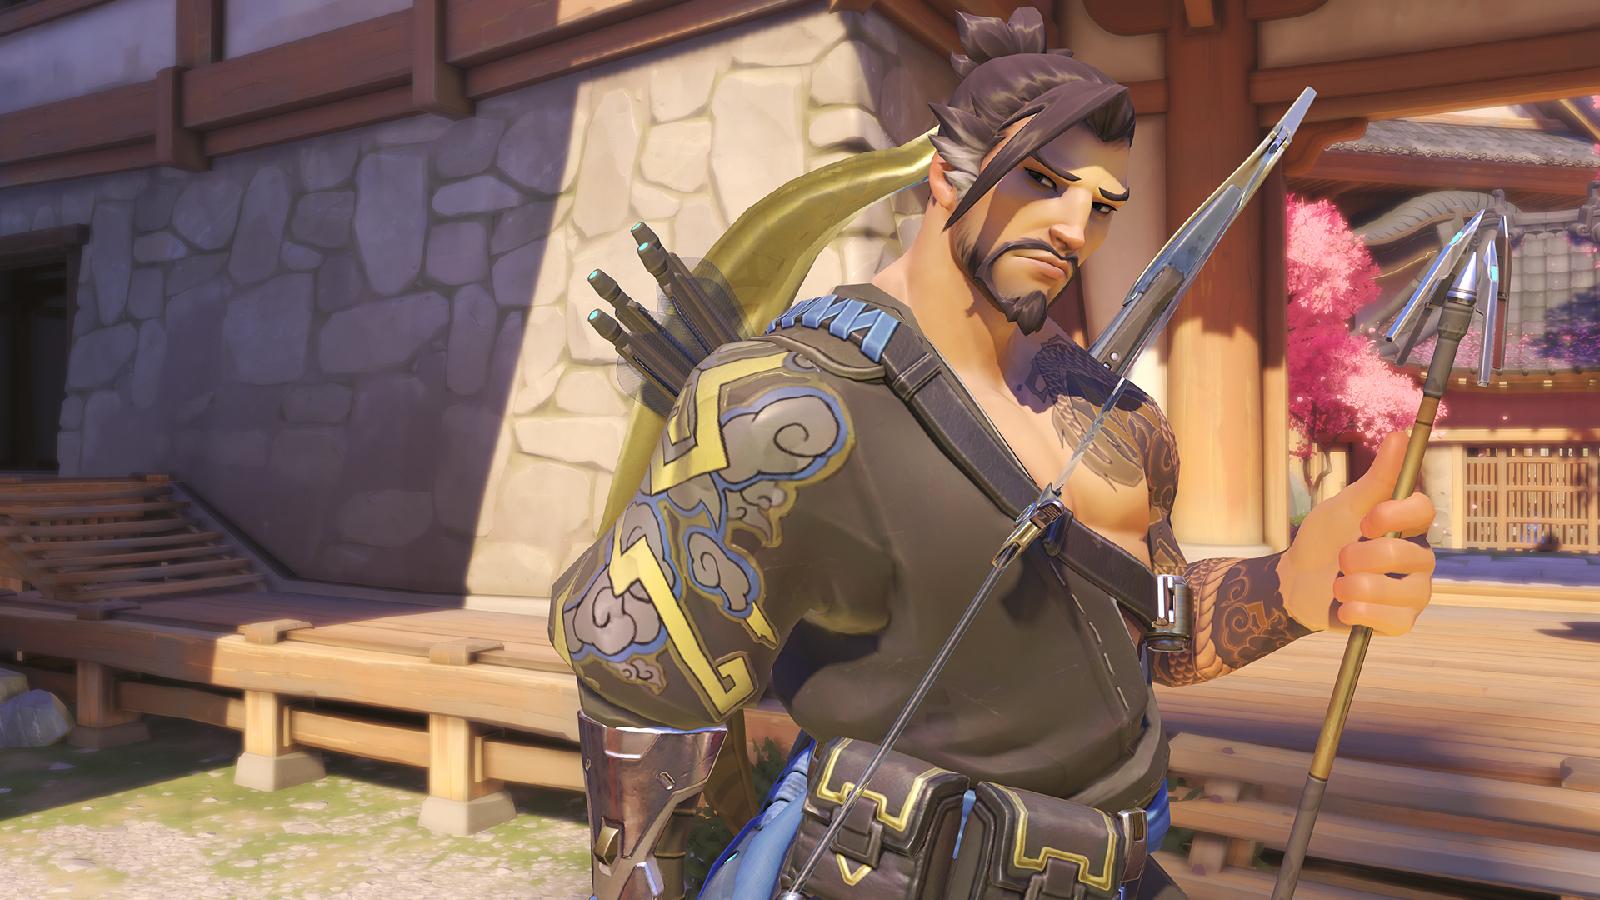 Overwatch 2 Hanzo in-game image